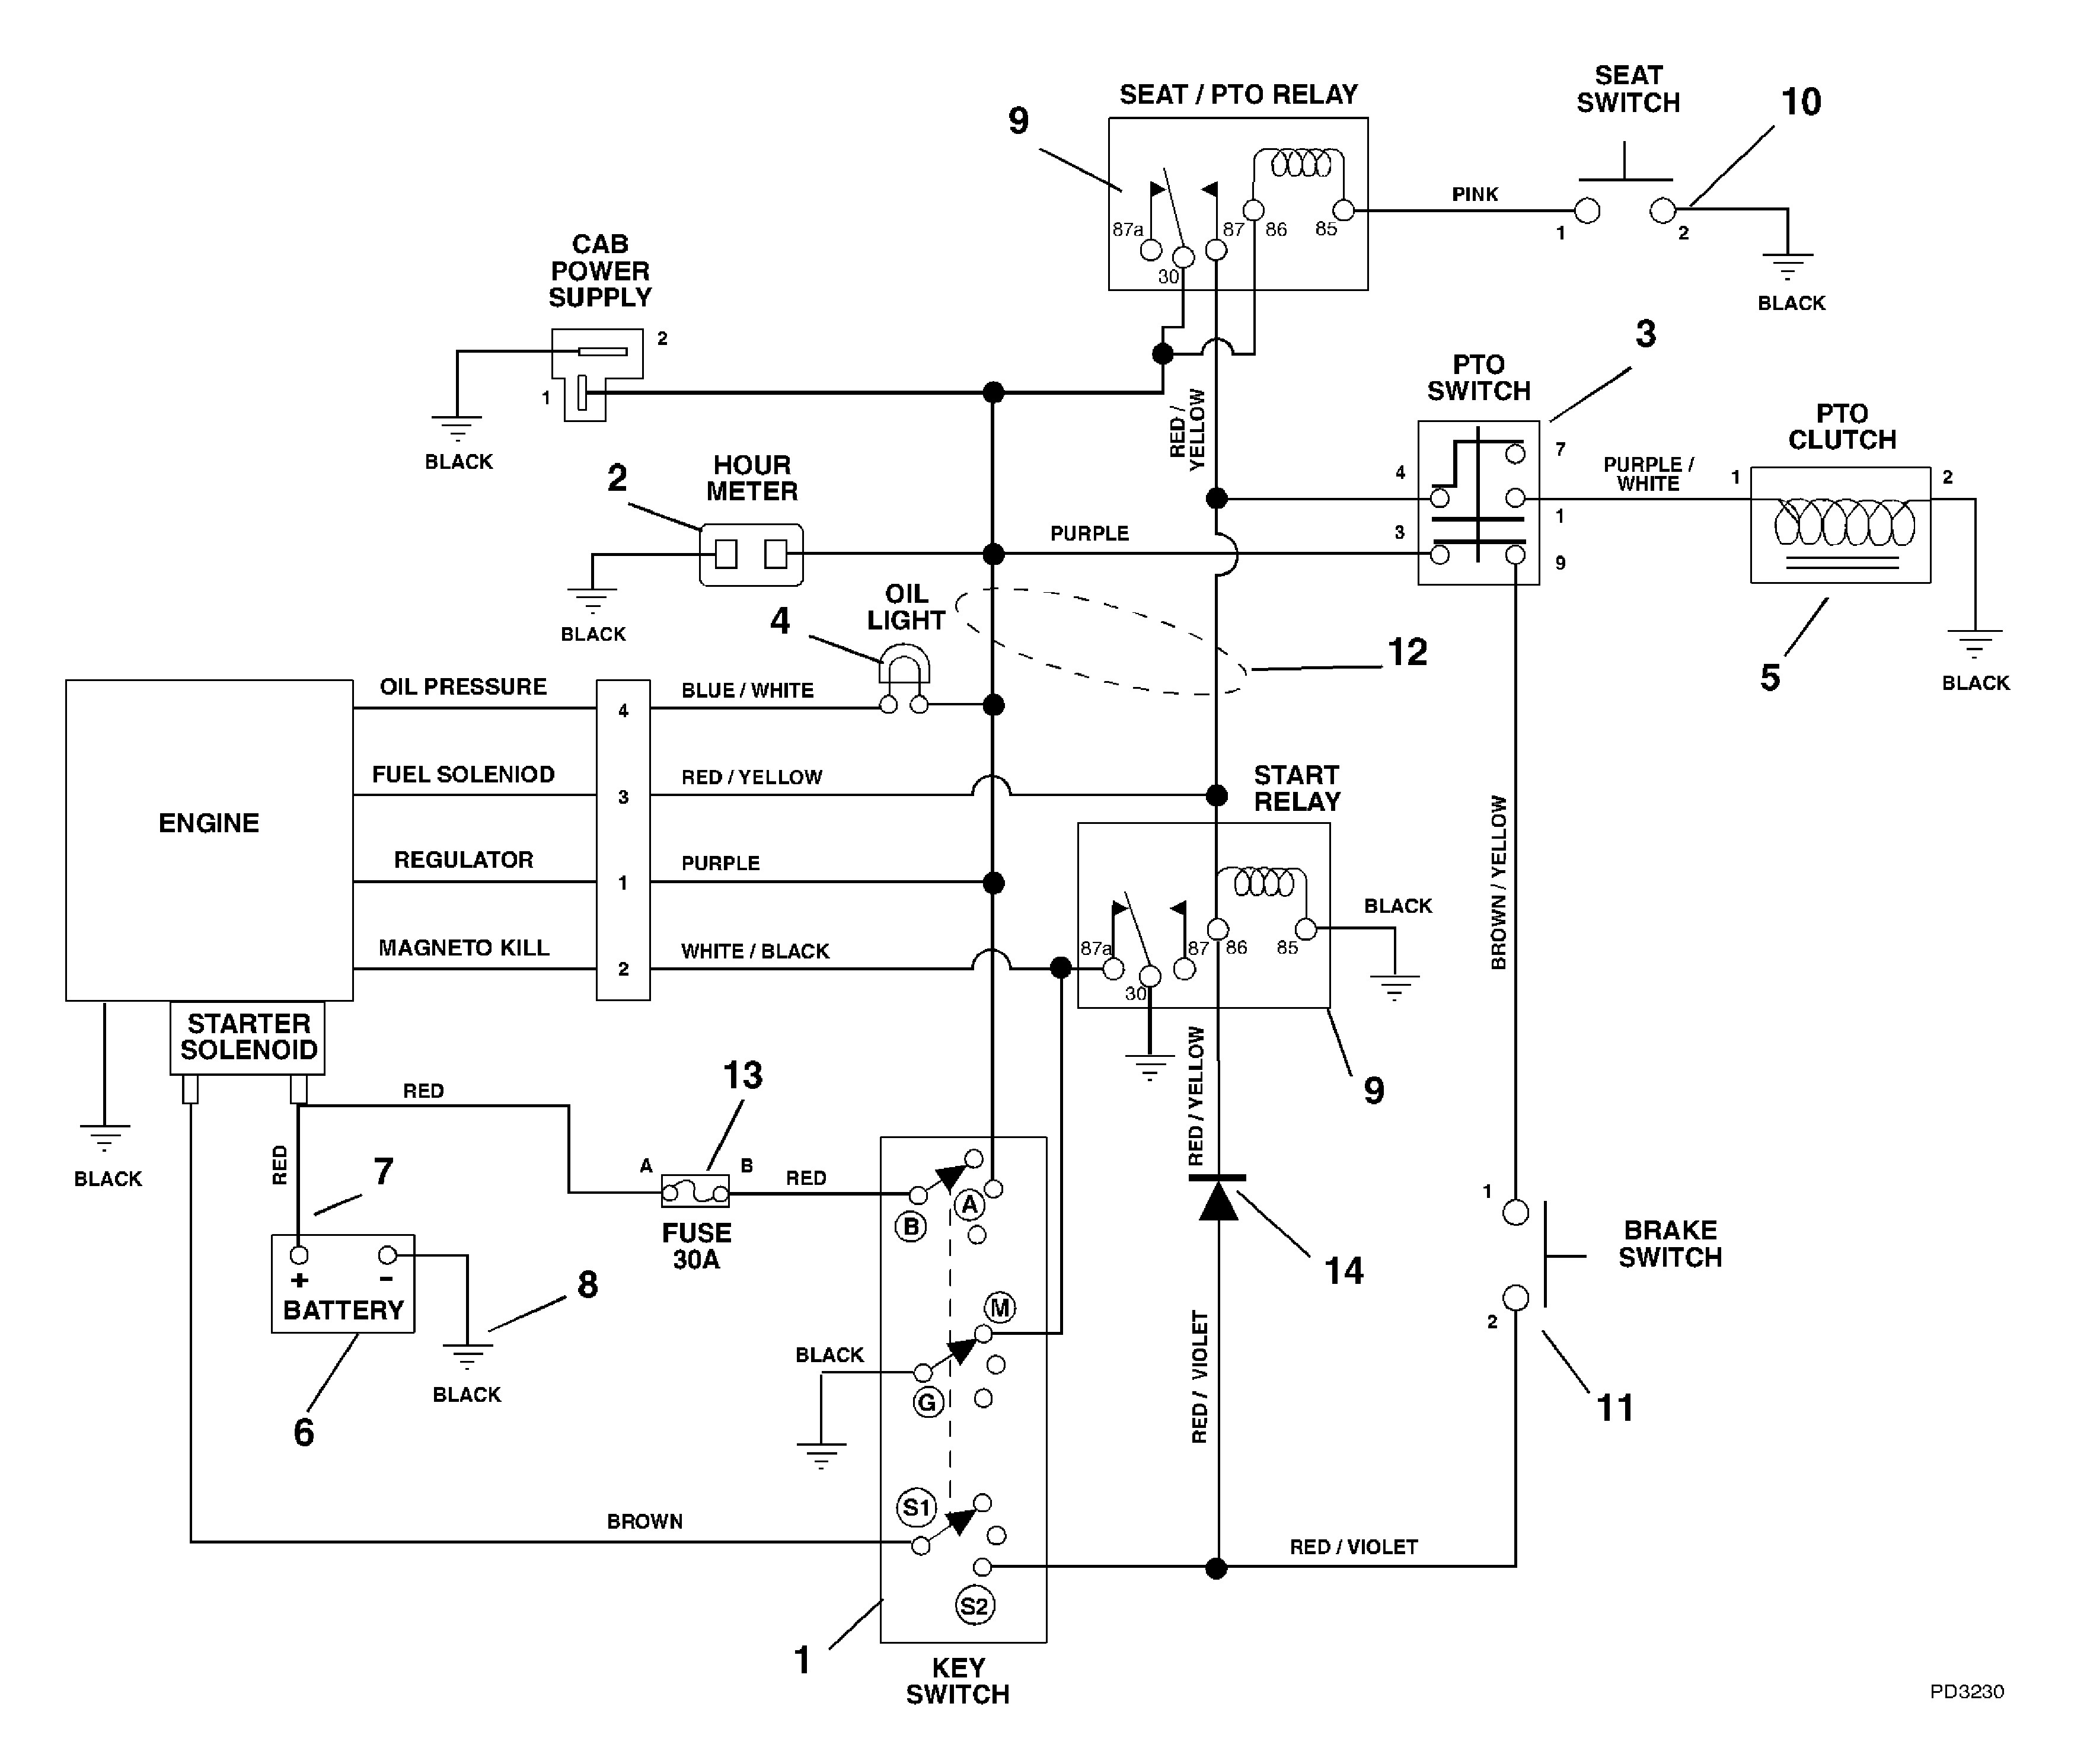 Wright Stander Electric Start Wire Schematic Wright Stander Wiring Diagram 1992 ford F 250 Abs Wiring Of Wright Stander Electric Start Wire Schematic